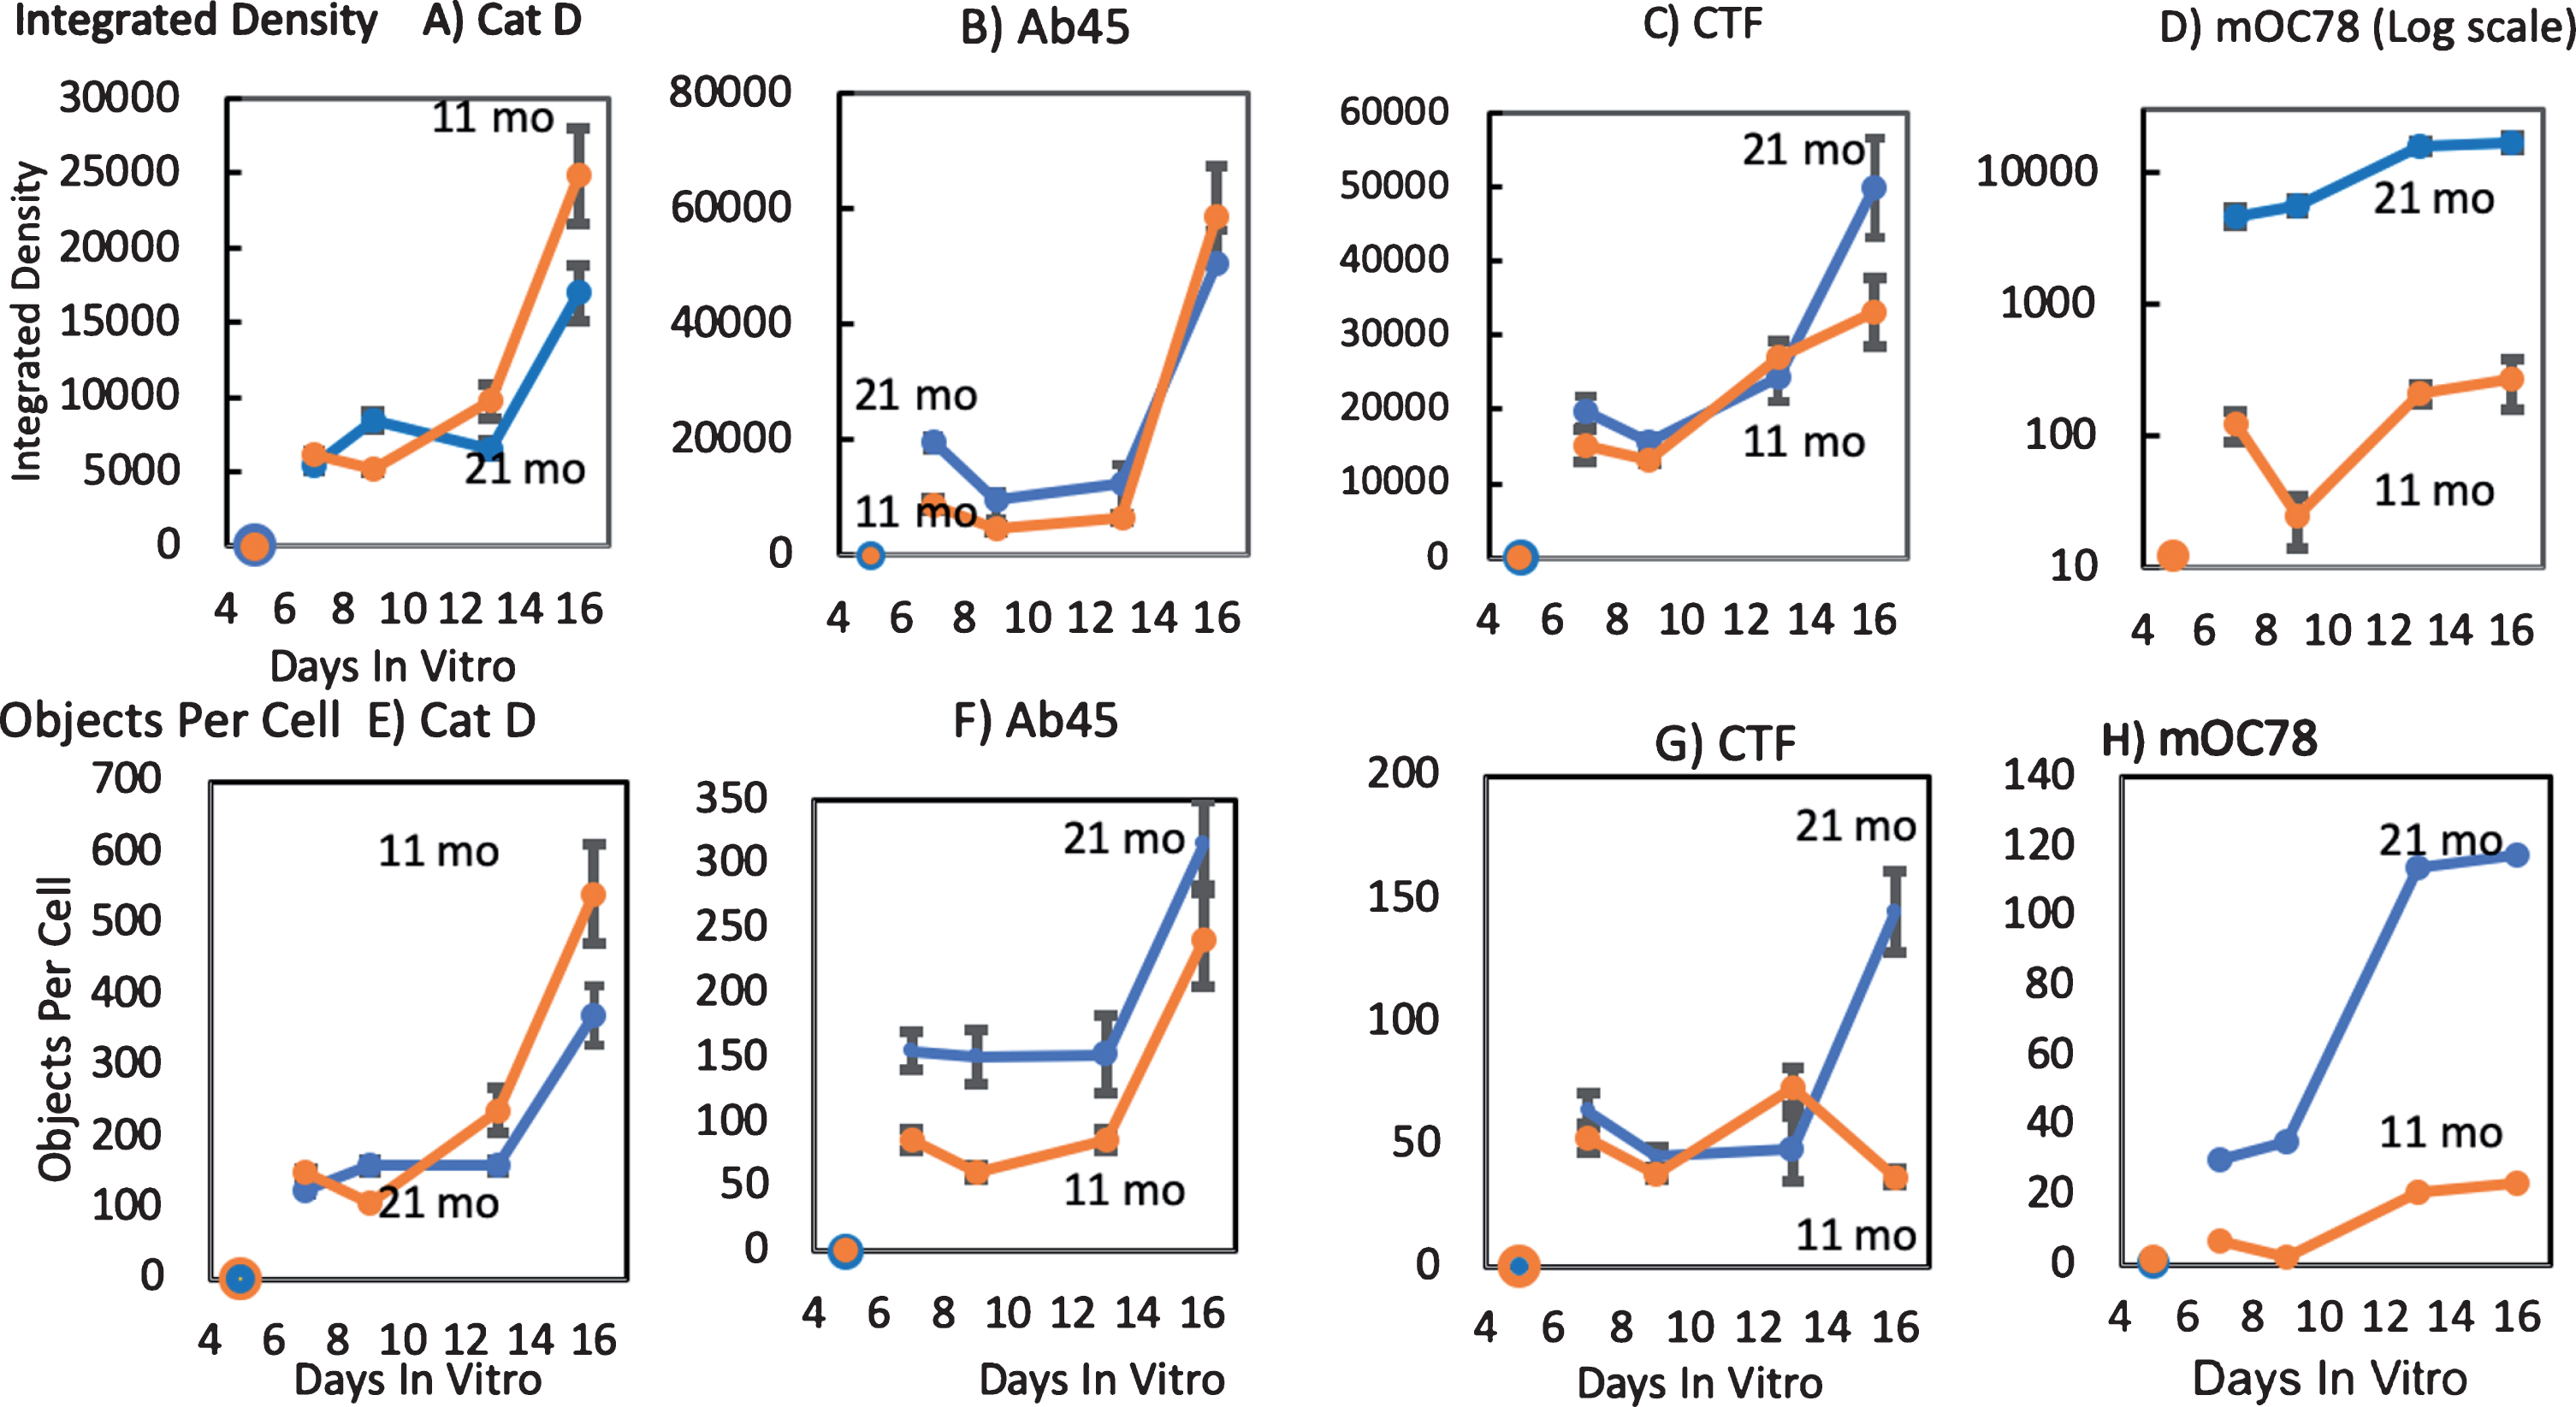 Greatest age-related increases in mOC78 by in vitro kinetics. Immunoreactive integrated density of (A) lysosomal Cathepsin D and (B-D) iAβ forms for neurons from an 11 (orange) and a 21-month-old (blue) female 3xTg-AD mouse. These results are paralleled by measures of objects counted per cell (E-H) from the same cells. Similar kinetics for anti-cathepsin D immunoreactivity (A, E), and iAβ forms (A, E), Aβ45 (B,F), AβPP-CTF (C, G), and mOC78 (D, H). Note that panel D, Y axis is log scale. File 170712.